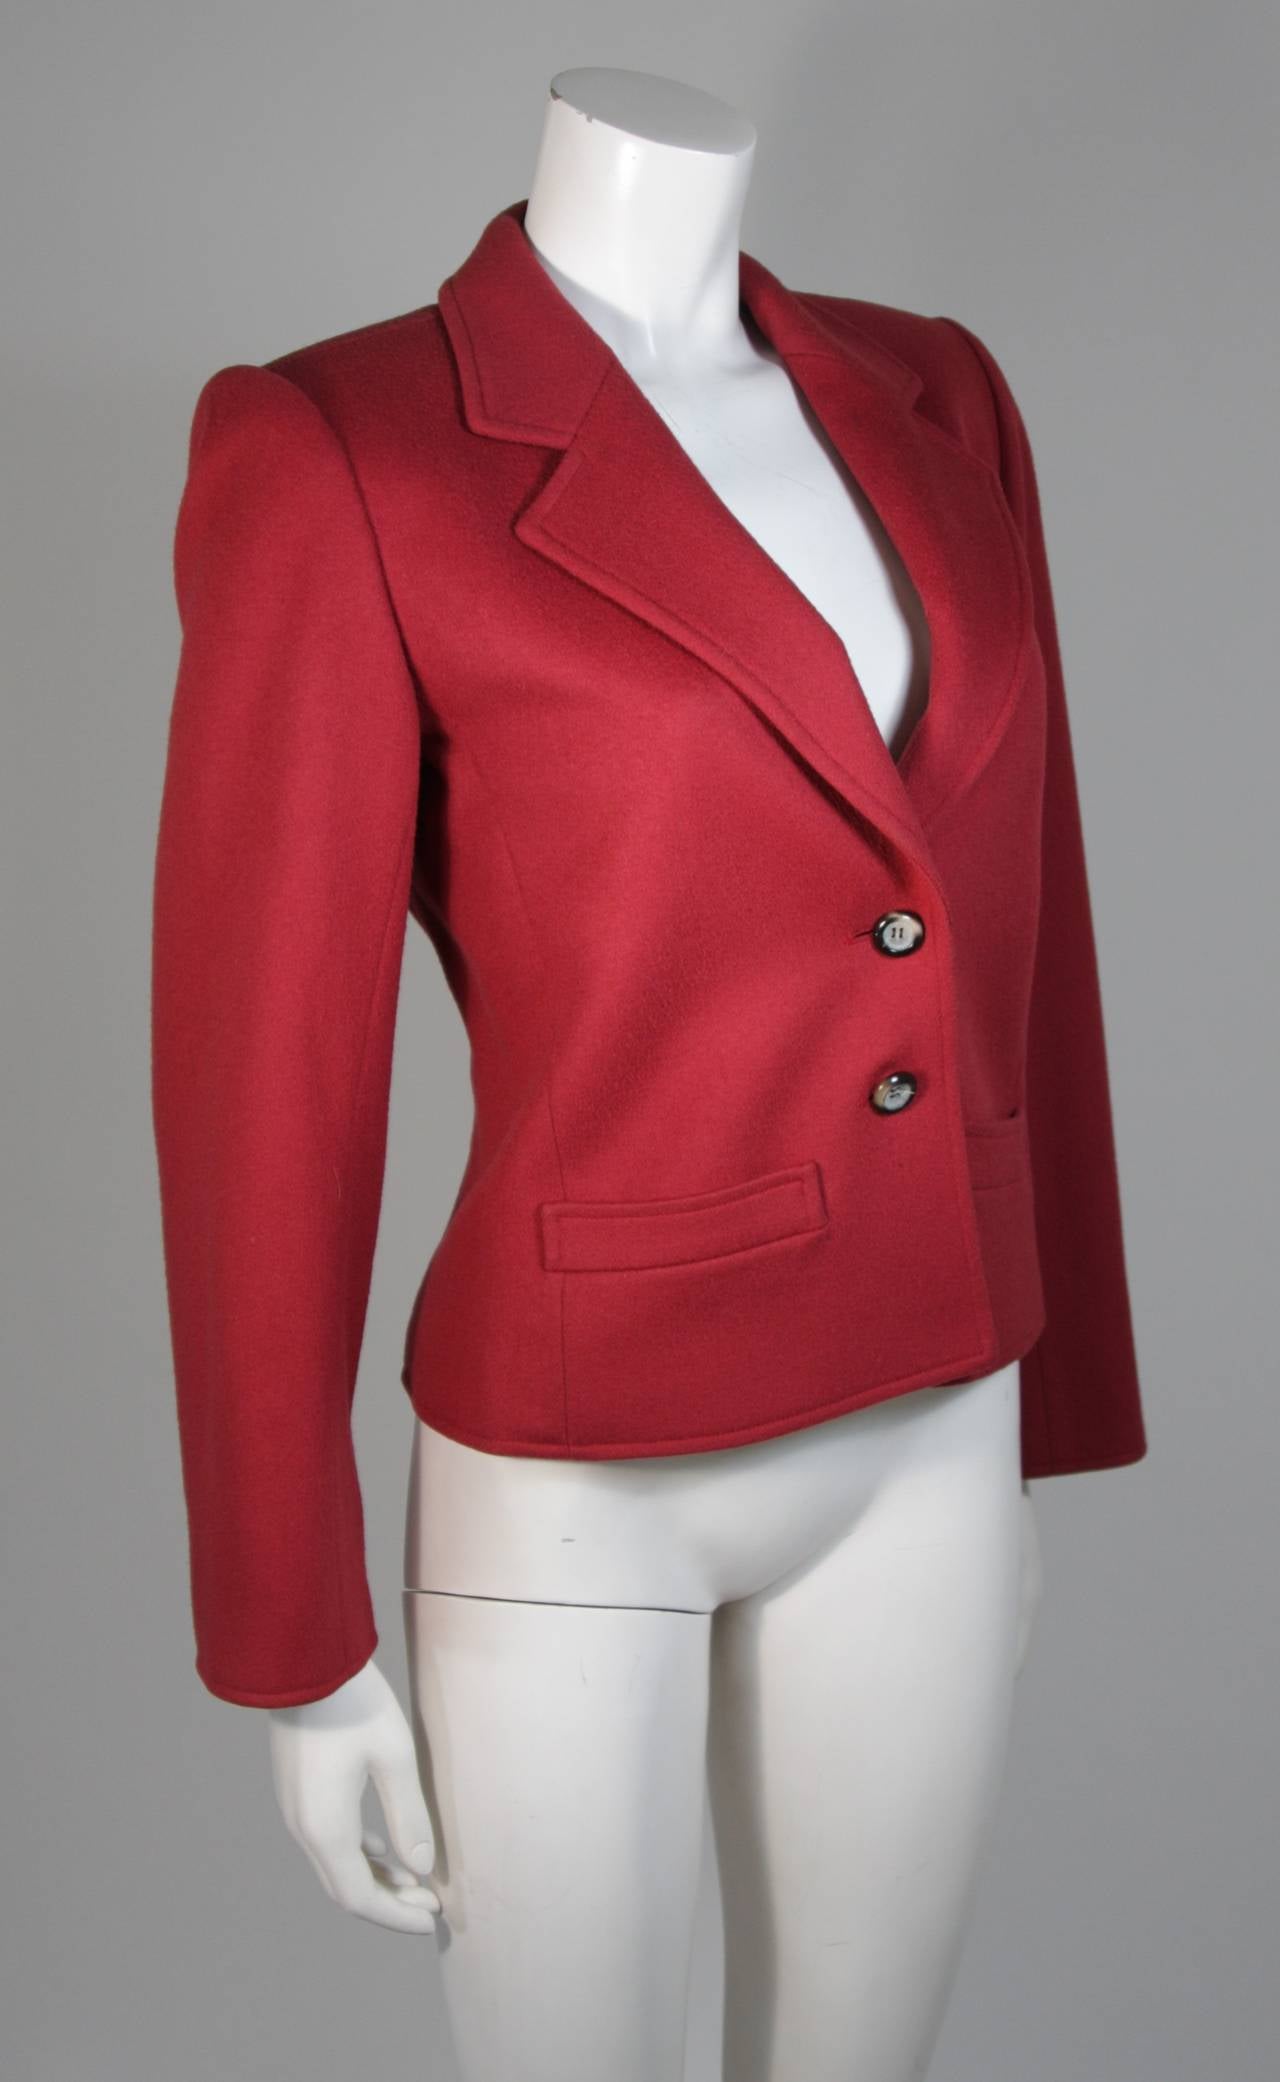 Yves Saint Laurent Burgundy Wool Jacket Size 38 In Excellent Condition For Sale In Los Angeles, CA